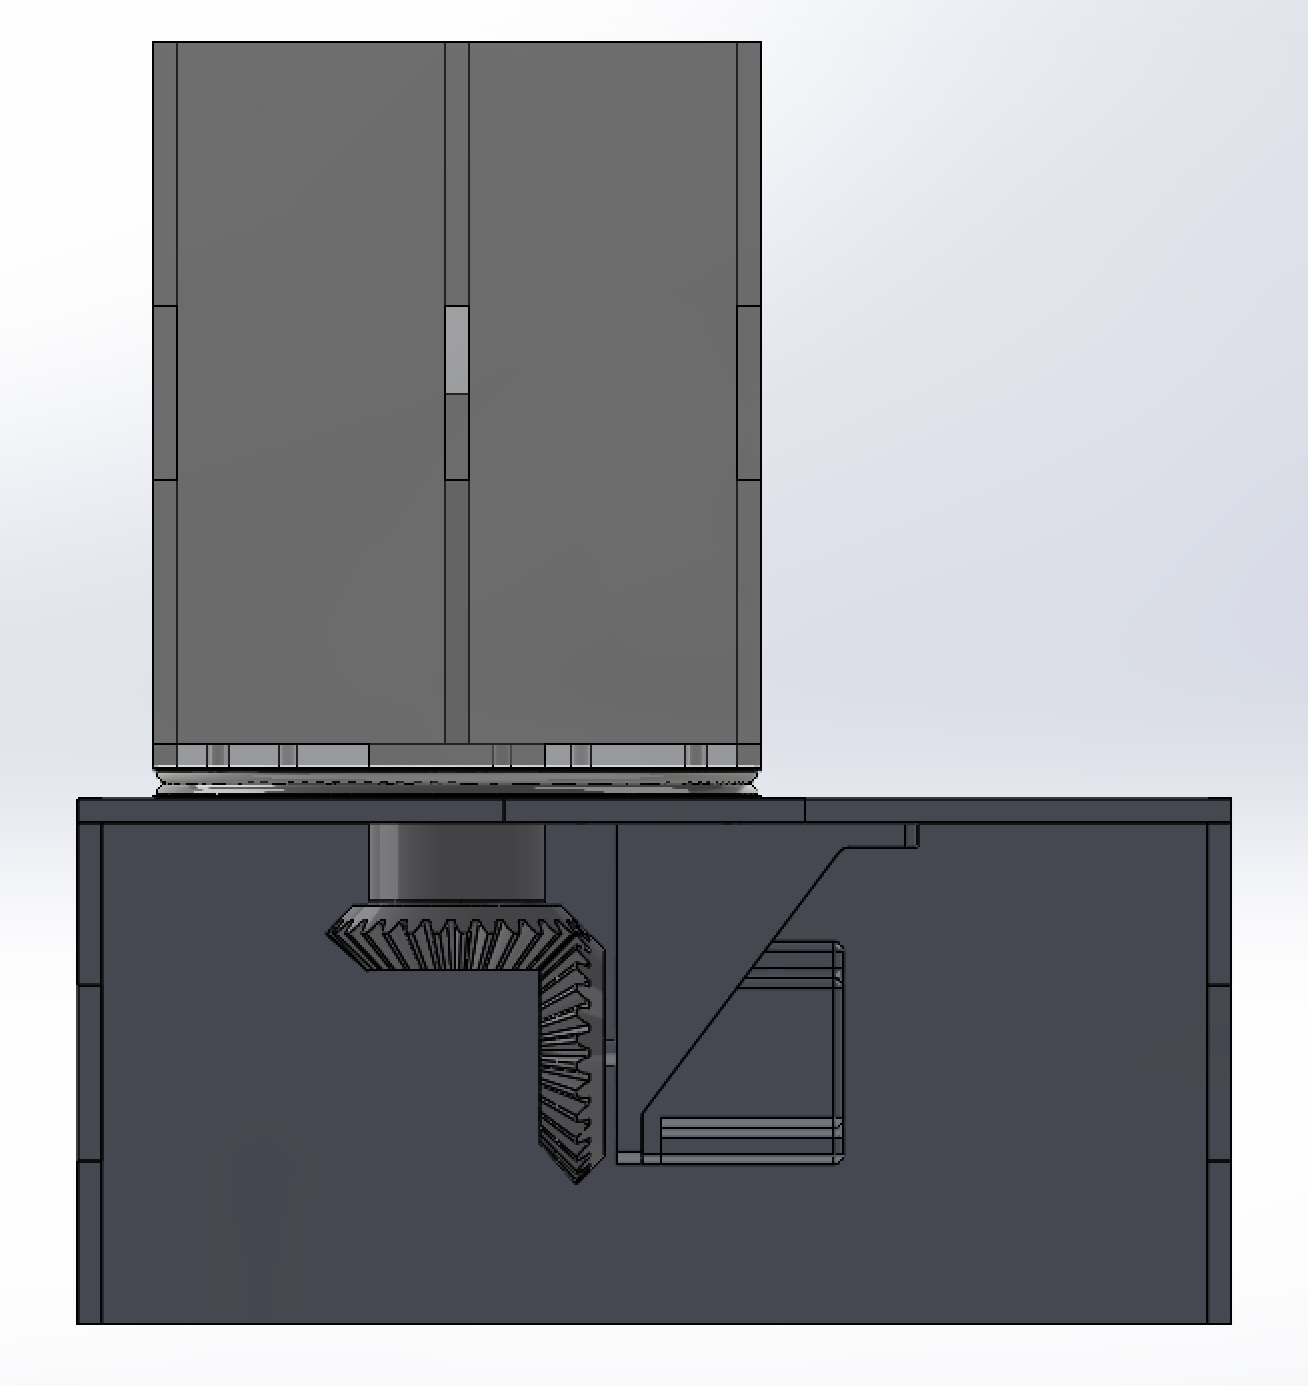 Cross Section of V1 CAD